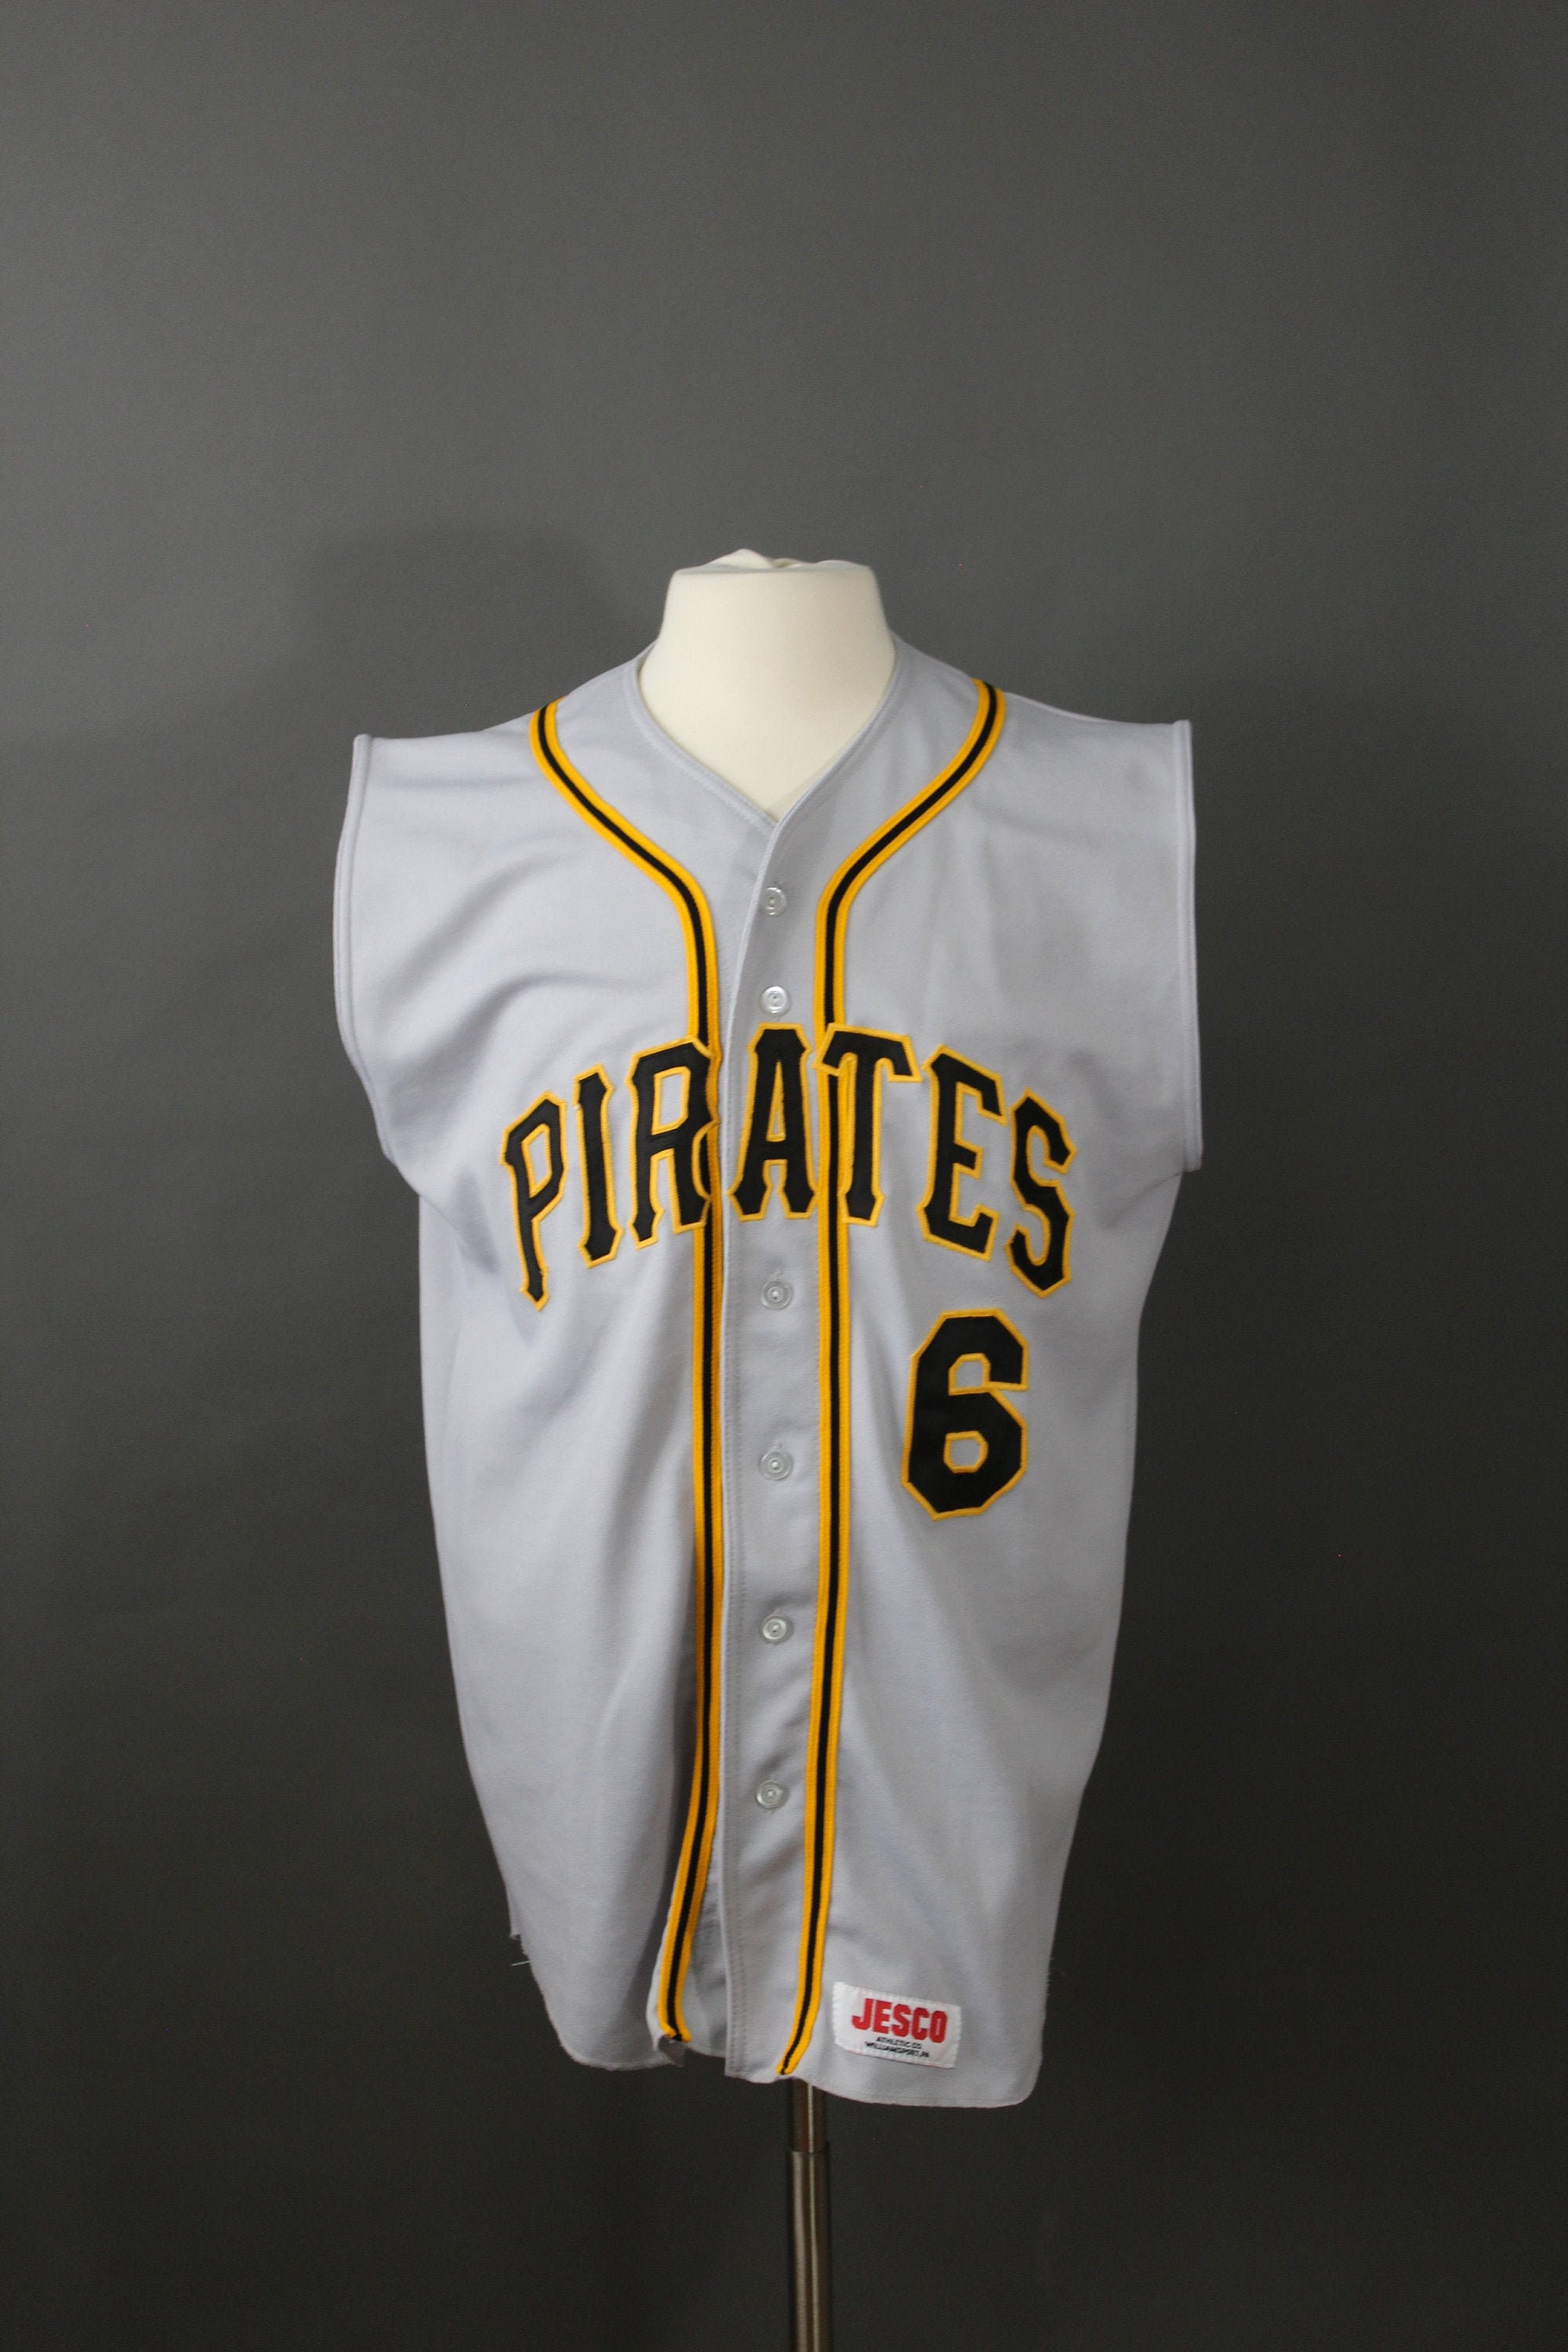 Pirates Baseball 6 Jesco Jersey. Vintage. Embroidered Patch 